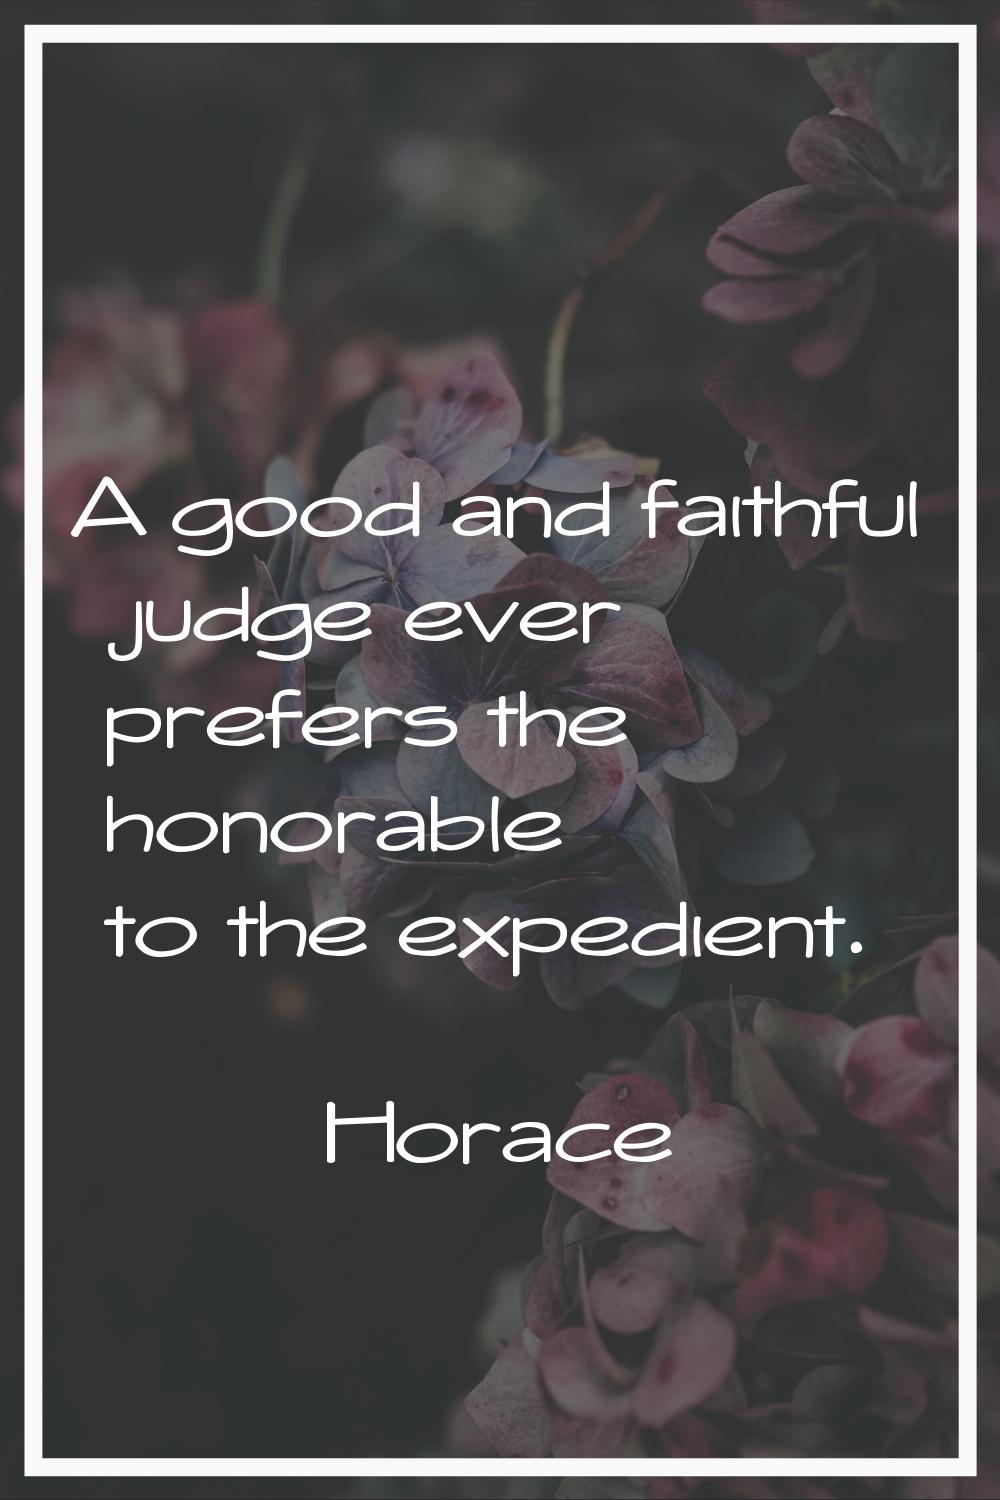 A good and faithful judge ever prefers the honorable to the expedient.